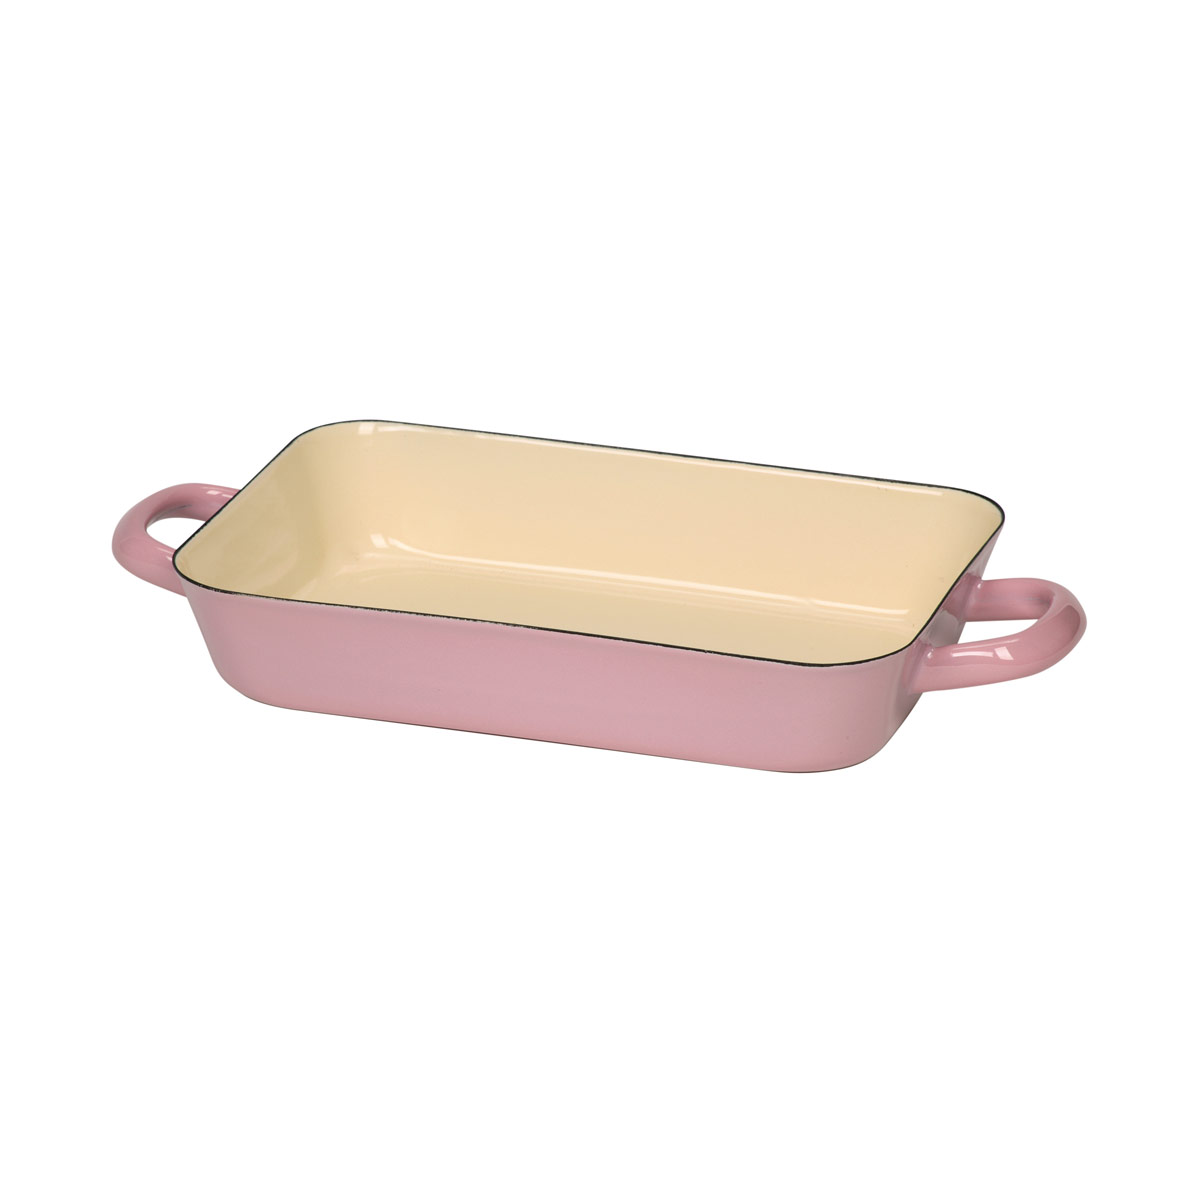 Riess Classic Bunt Pastell Bratpfanne 26x17 cm rosa - Emaille